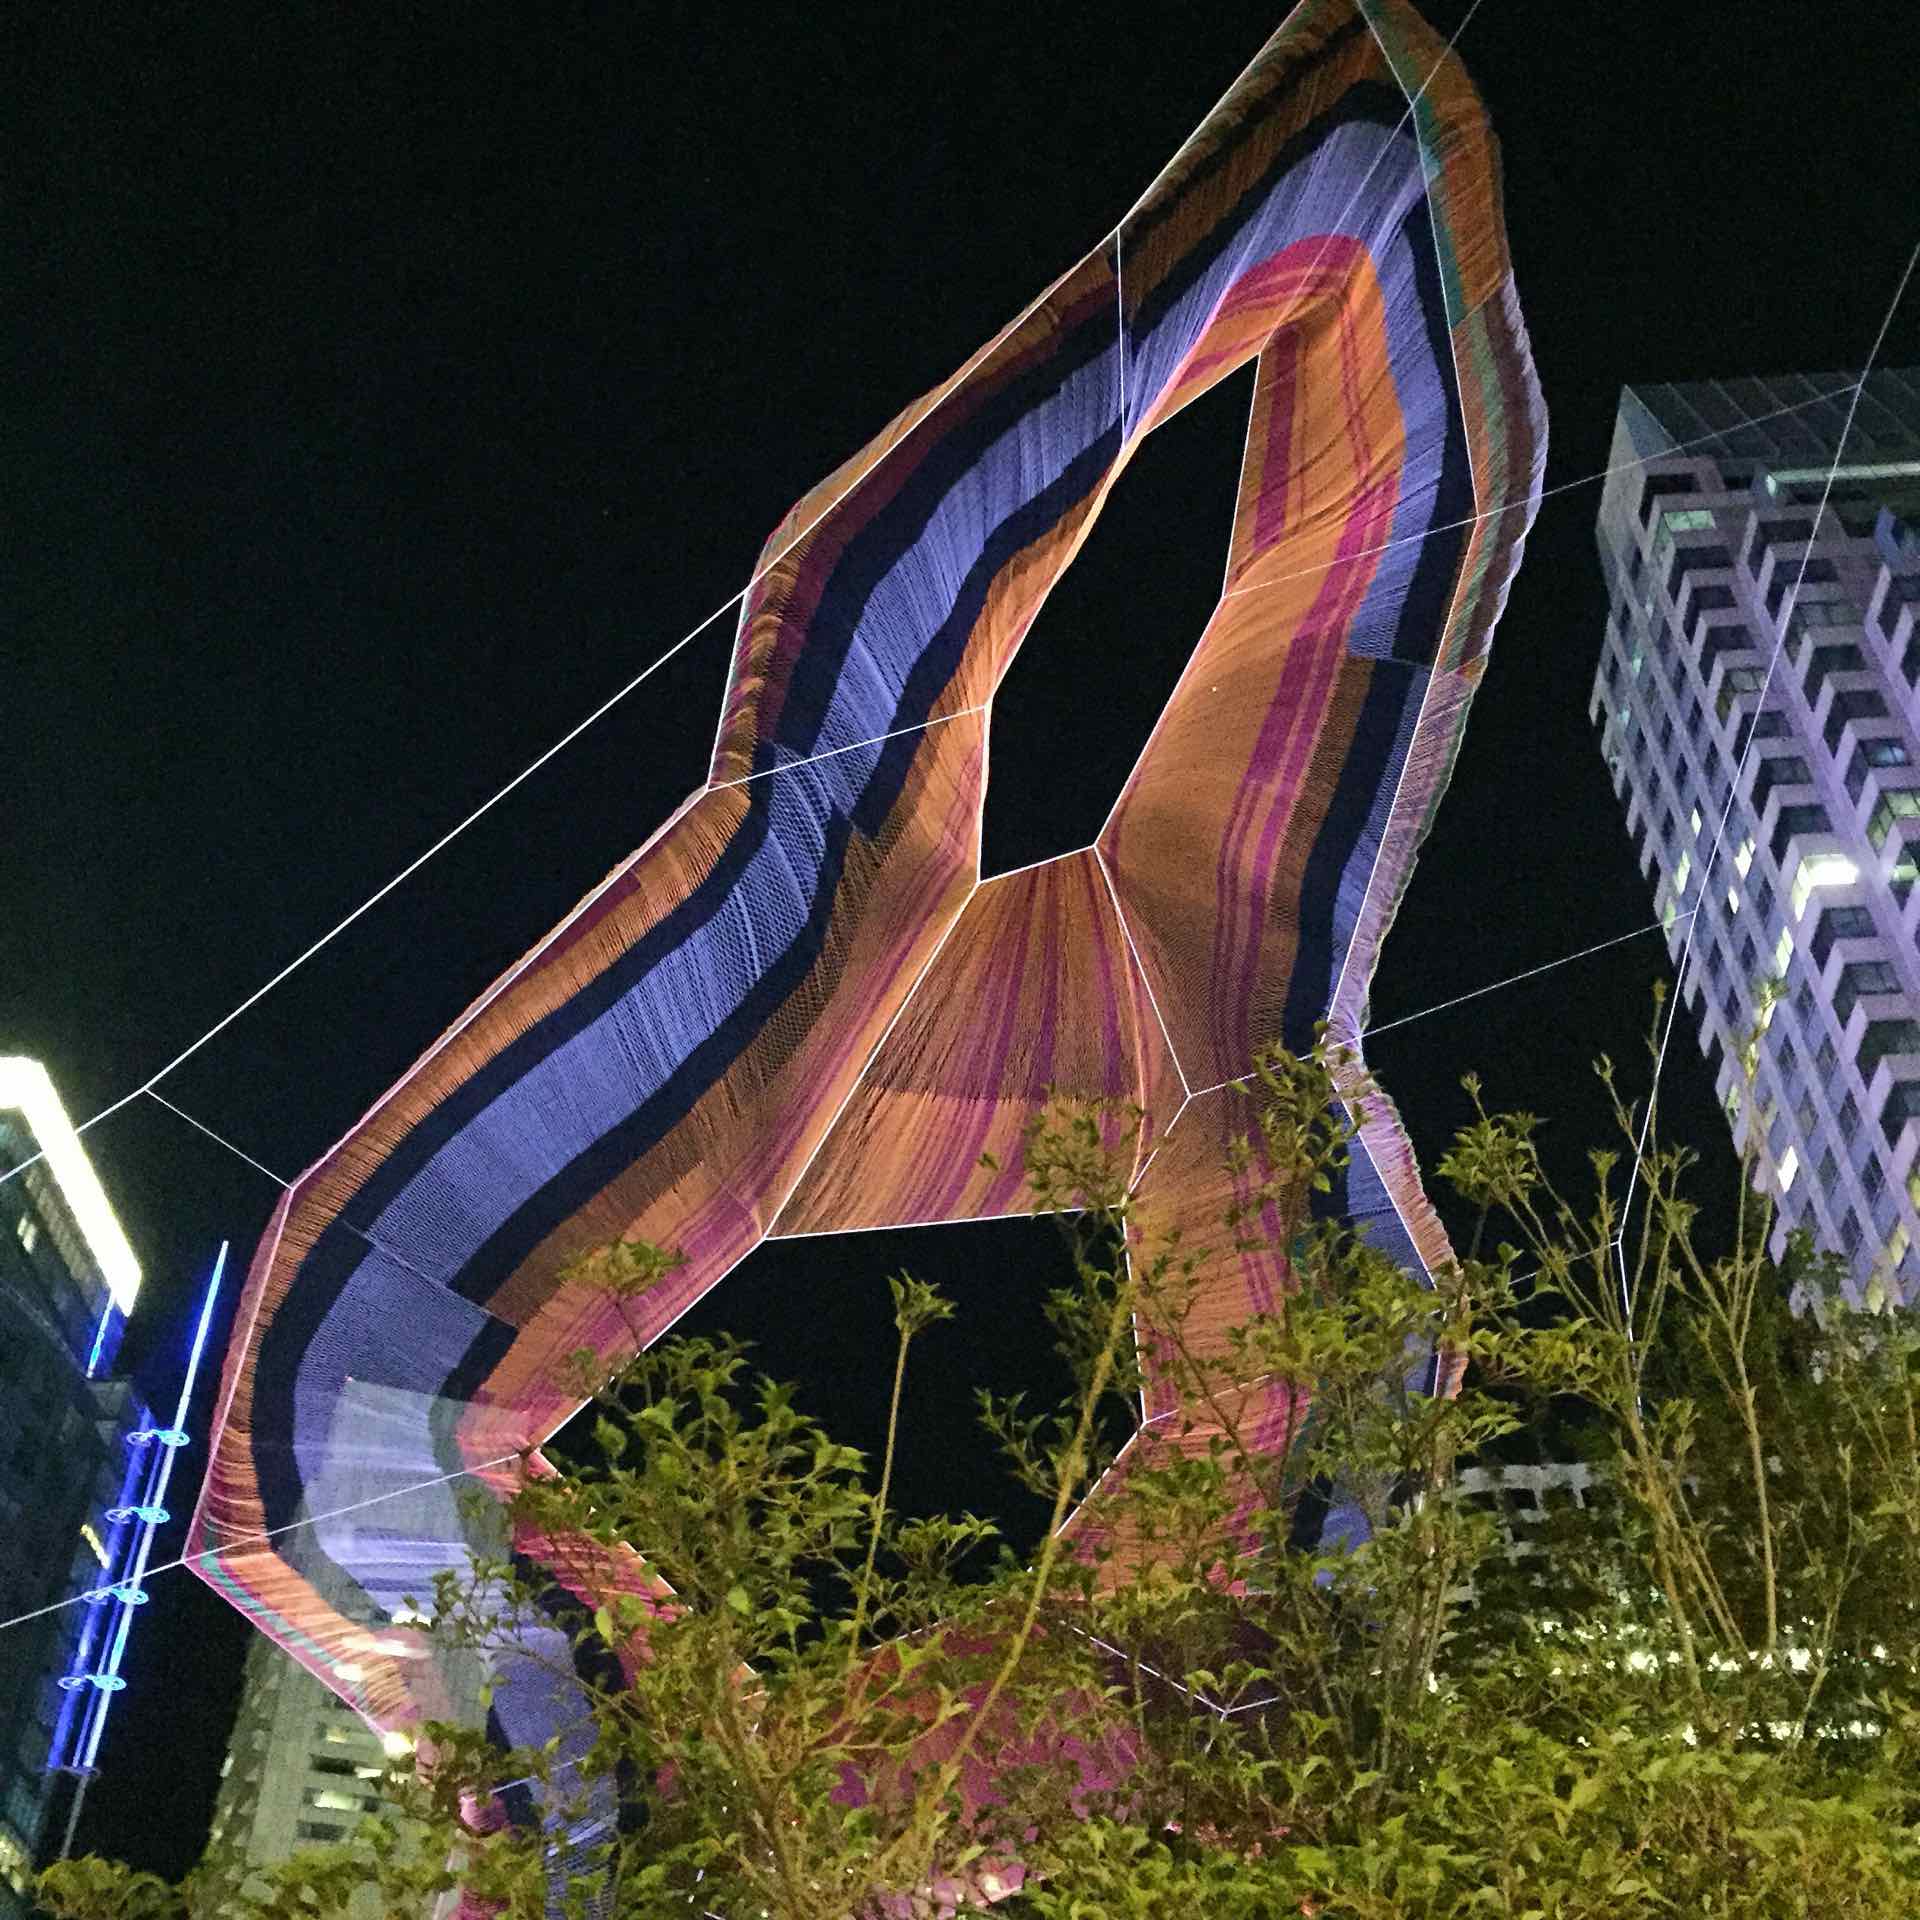 Public Art Comes to the Rose F. Kennedy Greenway